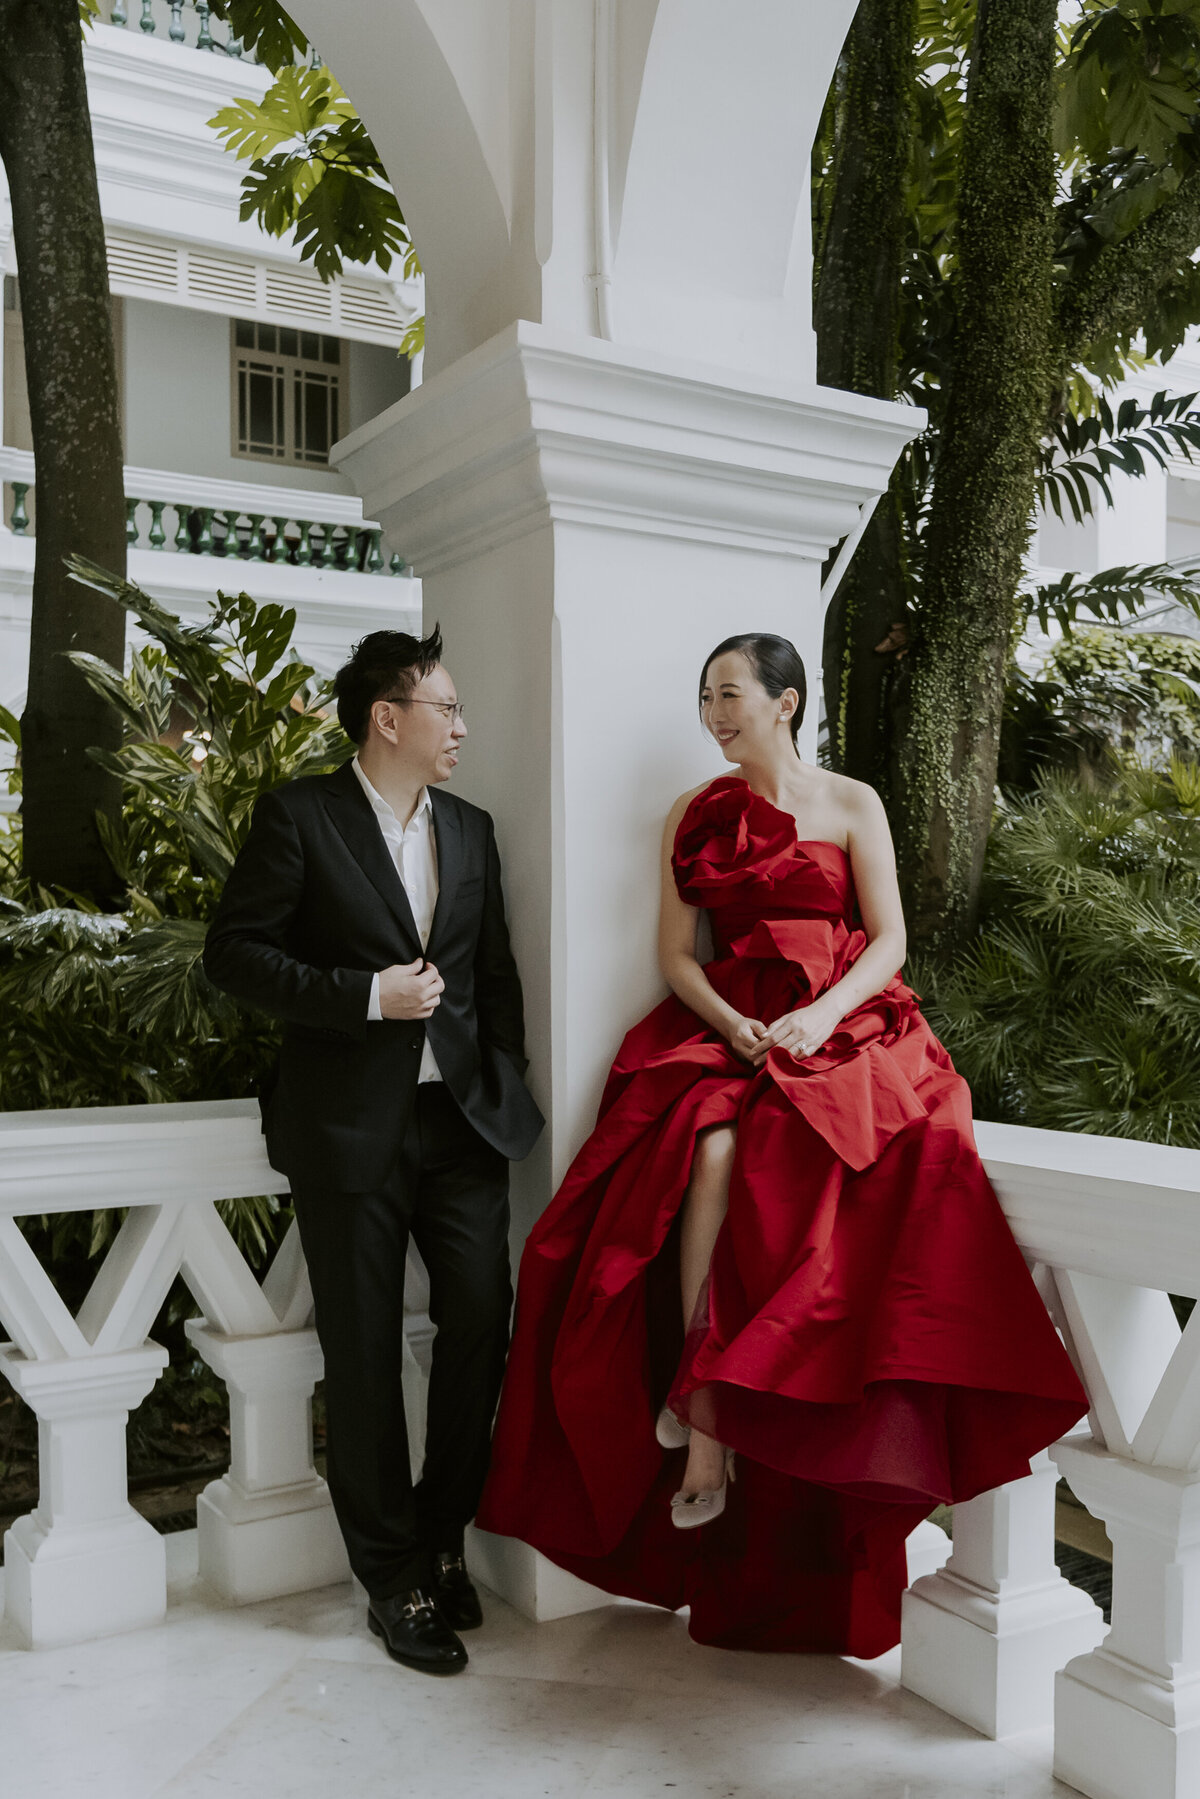 a woman in a red dress and a man in a black suit sit on the porch  and look at each other